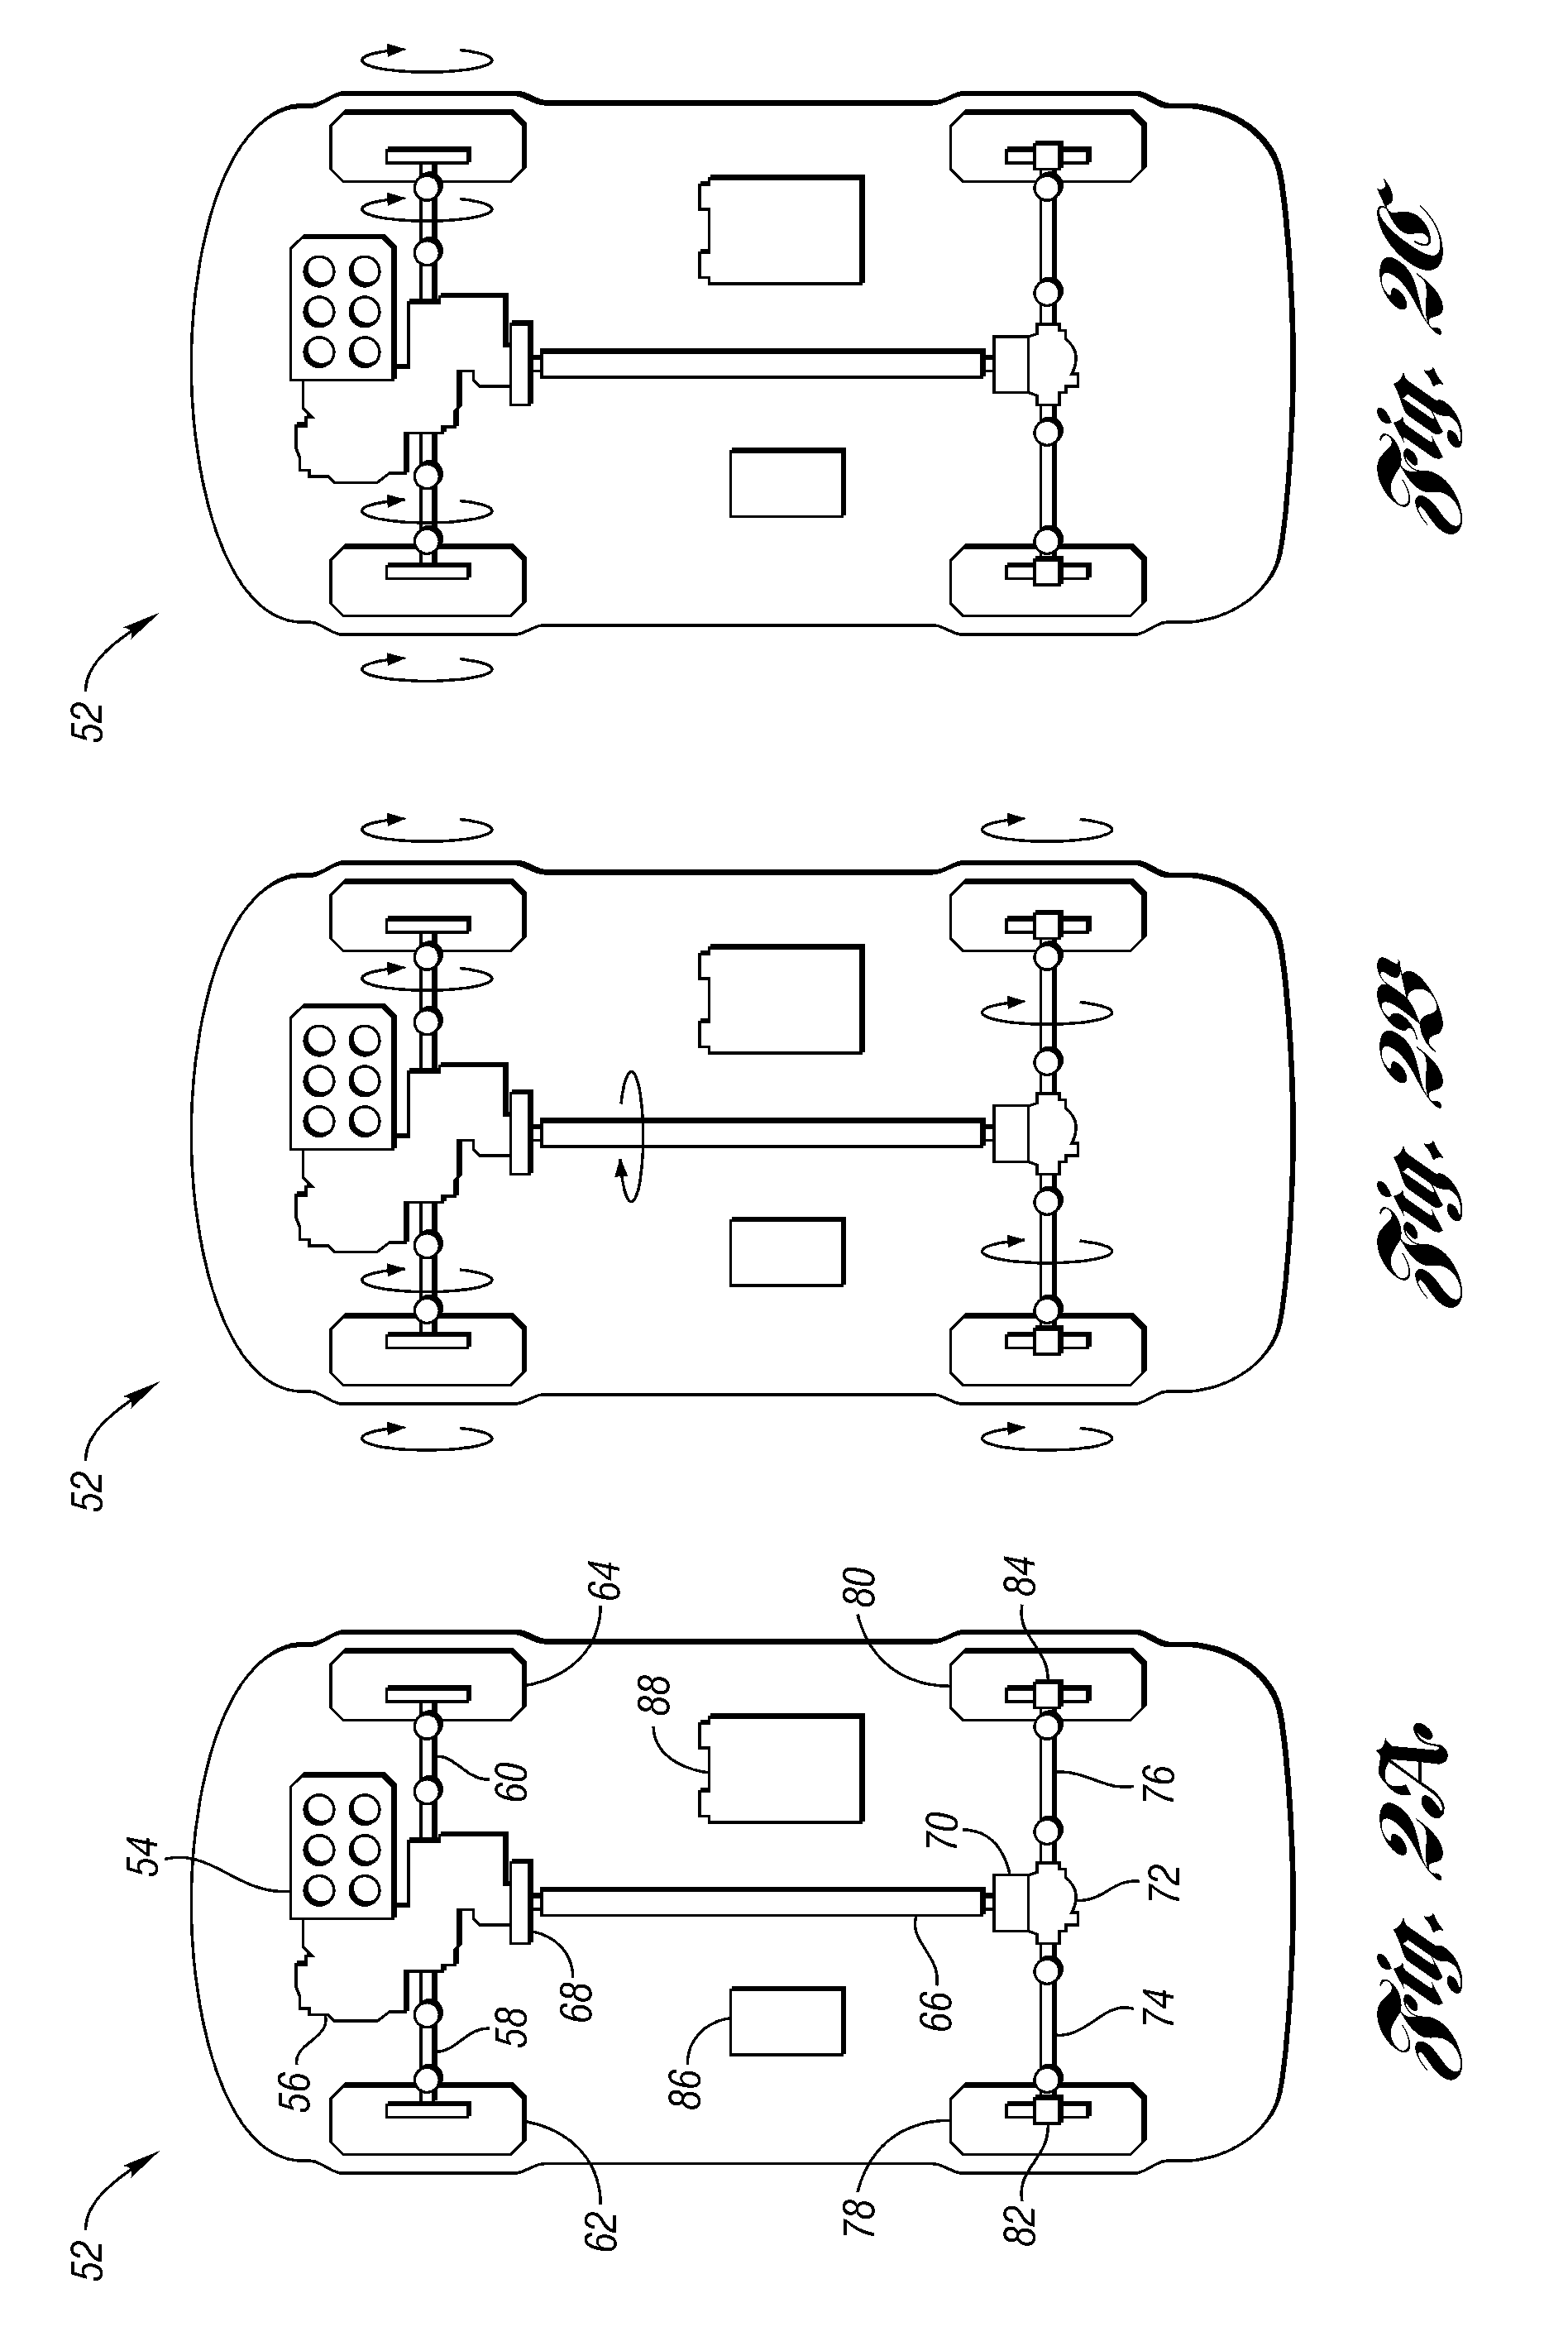 System and method for managing a powertrain in a vehicle